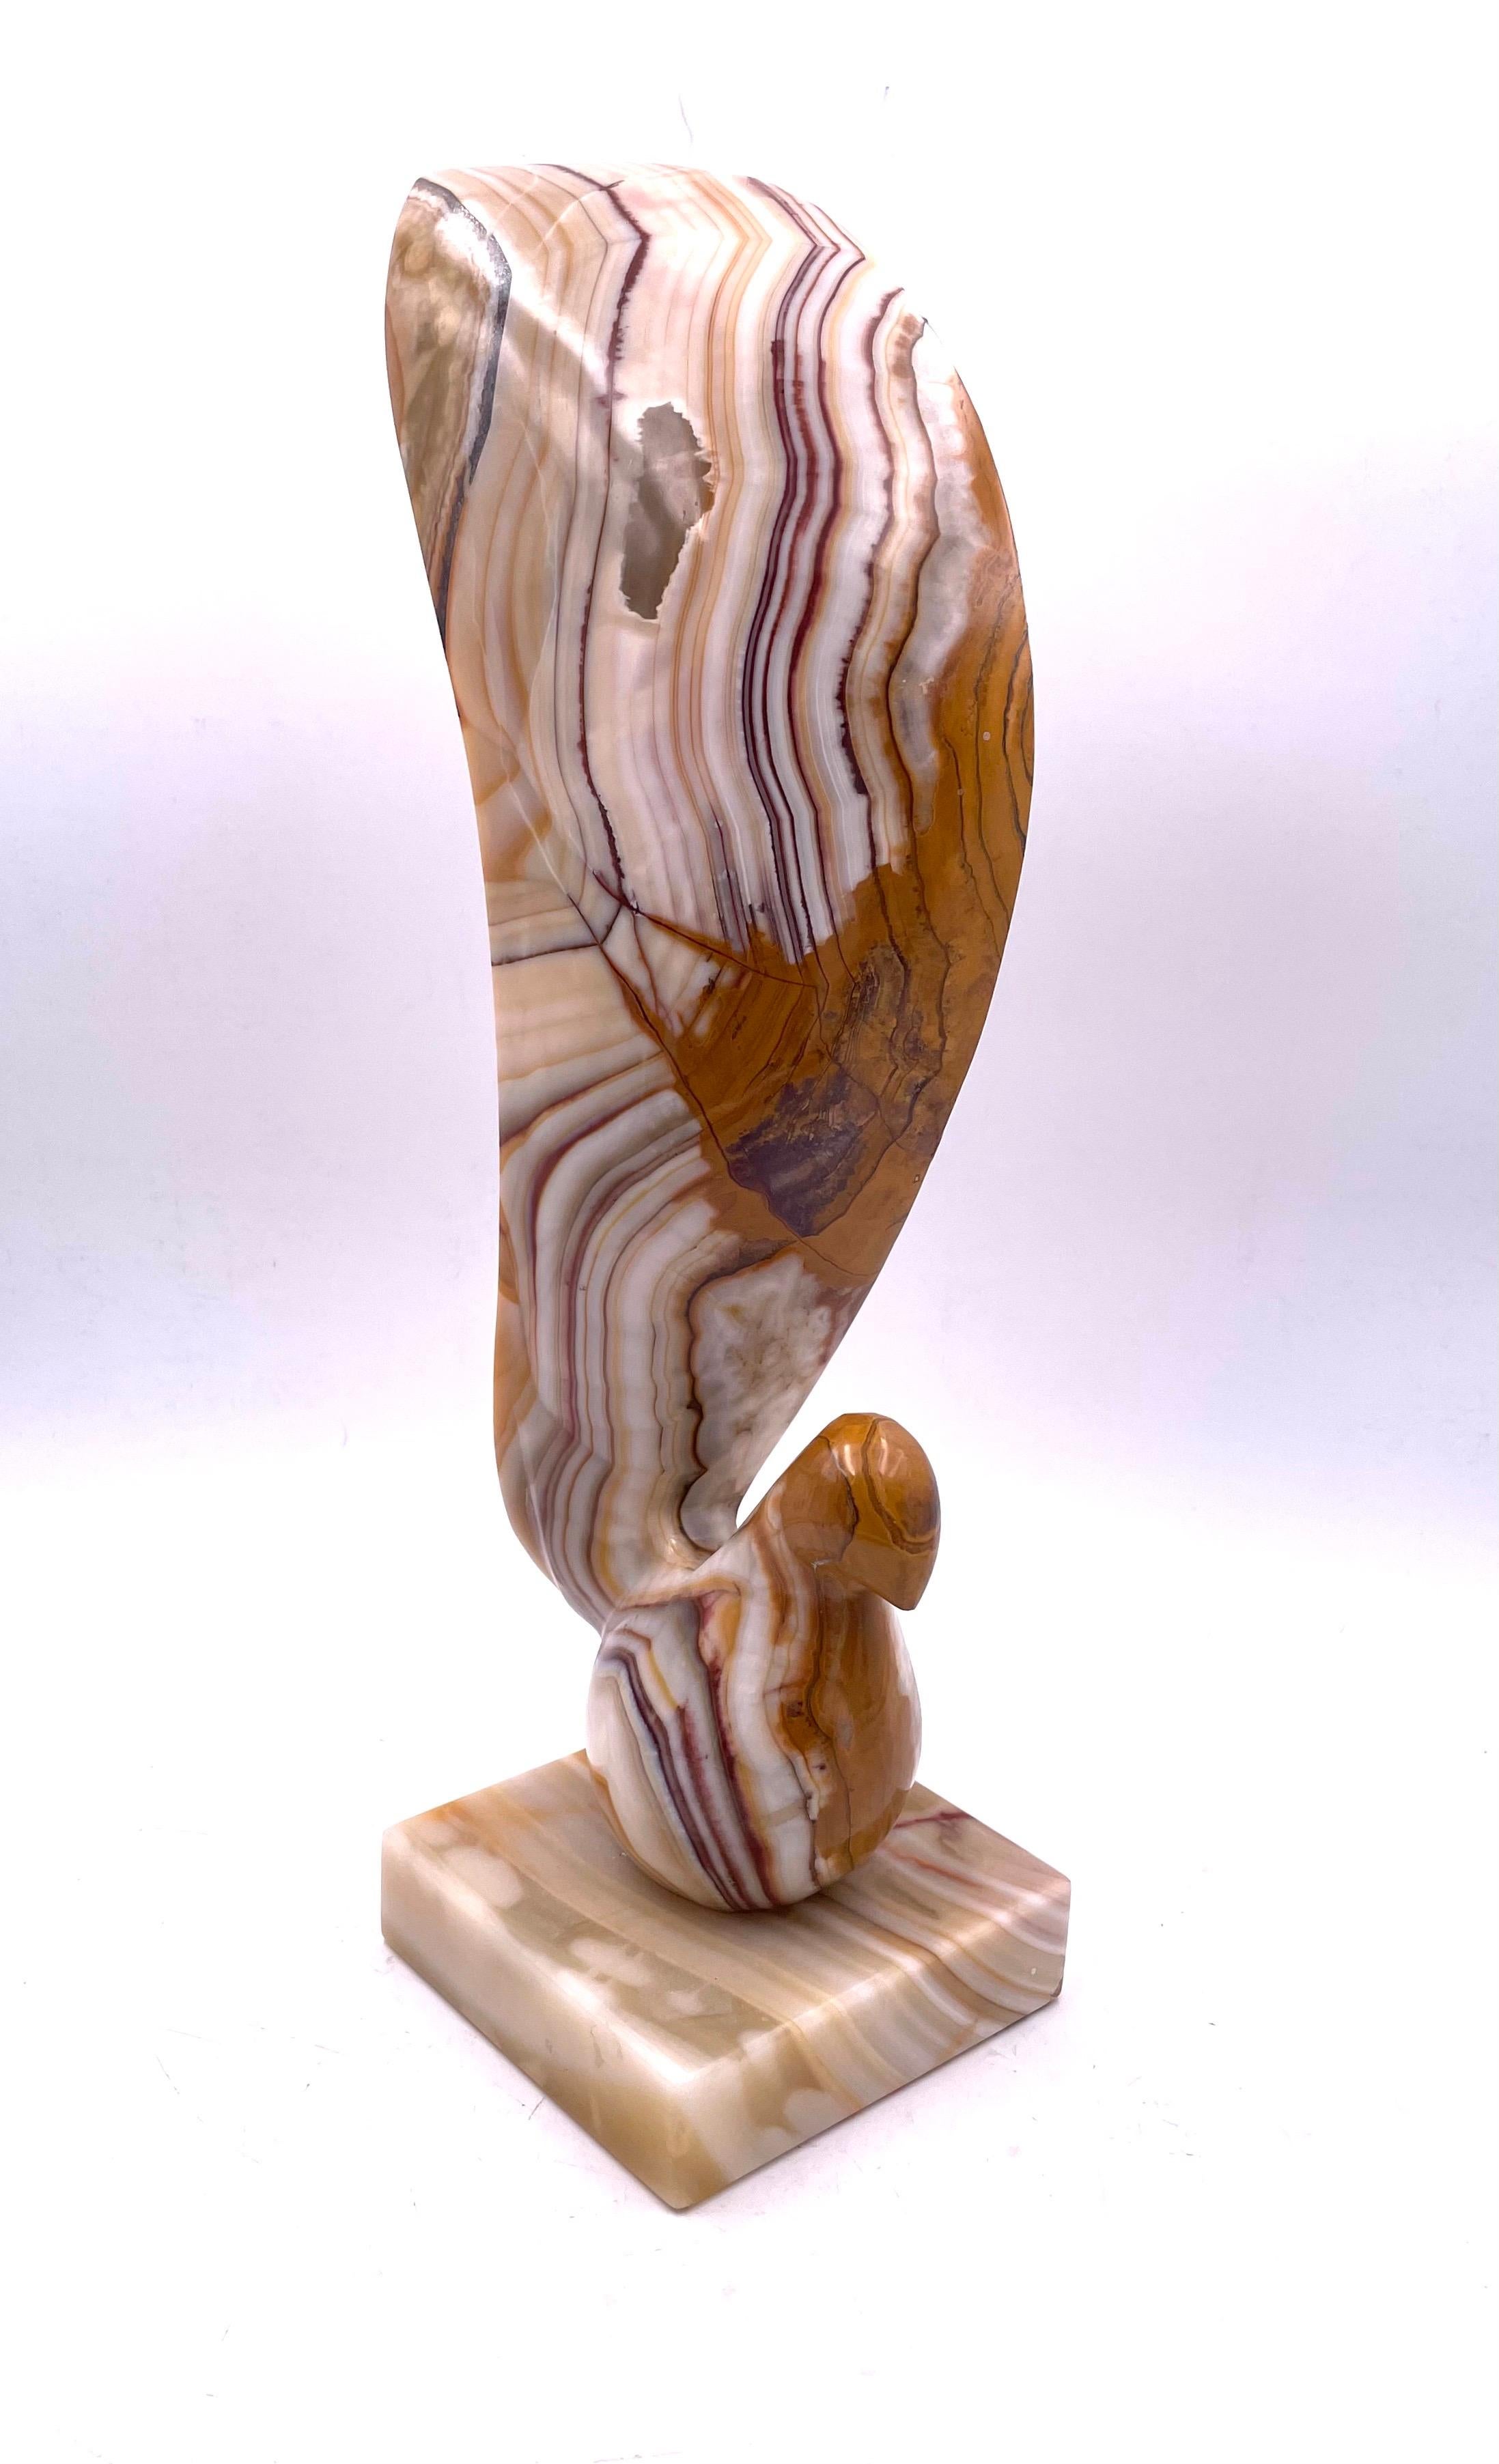 Beautiful solid onyx bird sculpture circa 1970's, excellent condition and beautiful grain on the stone no chips or cracks.